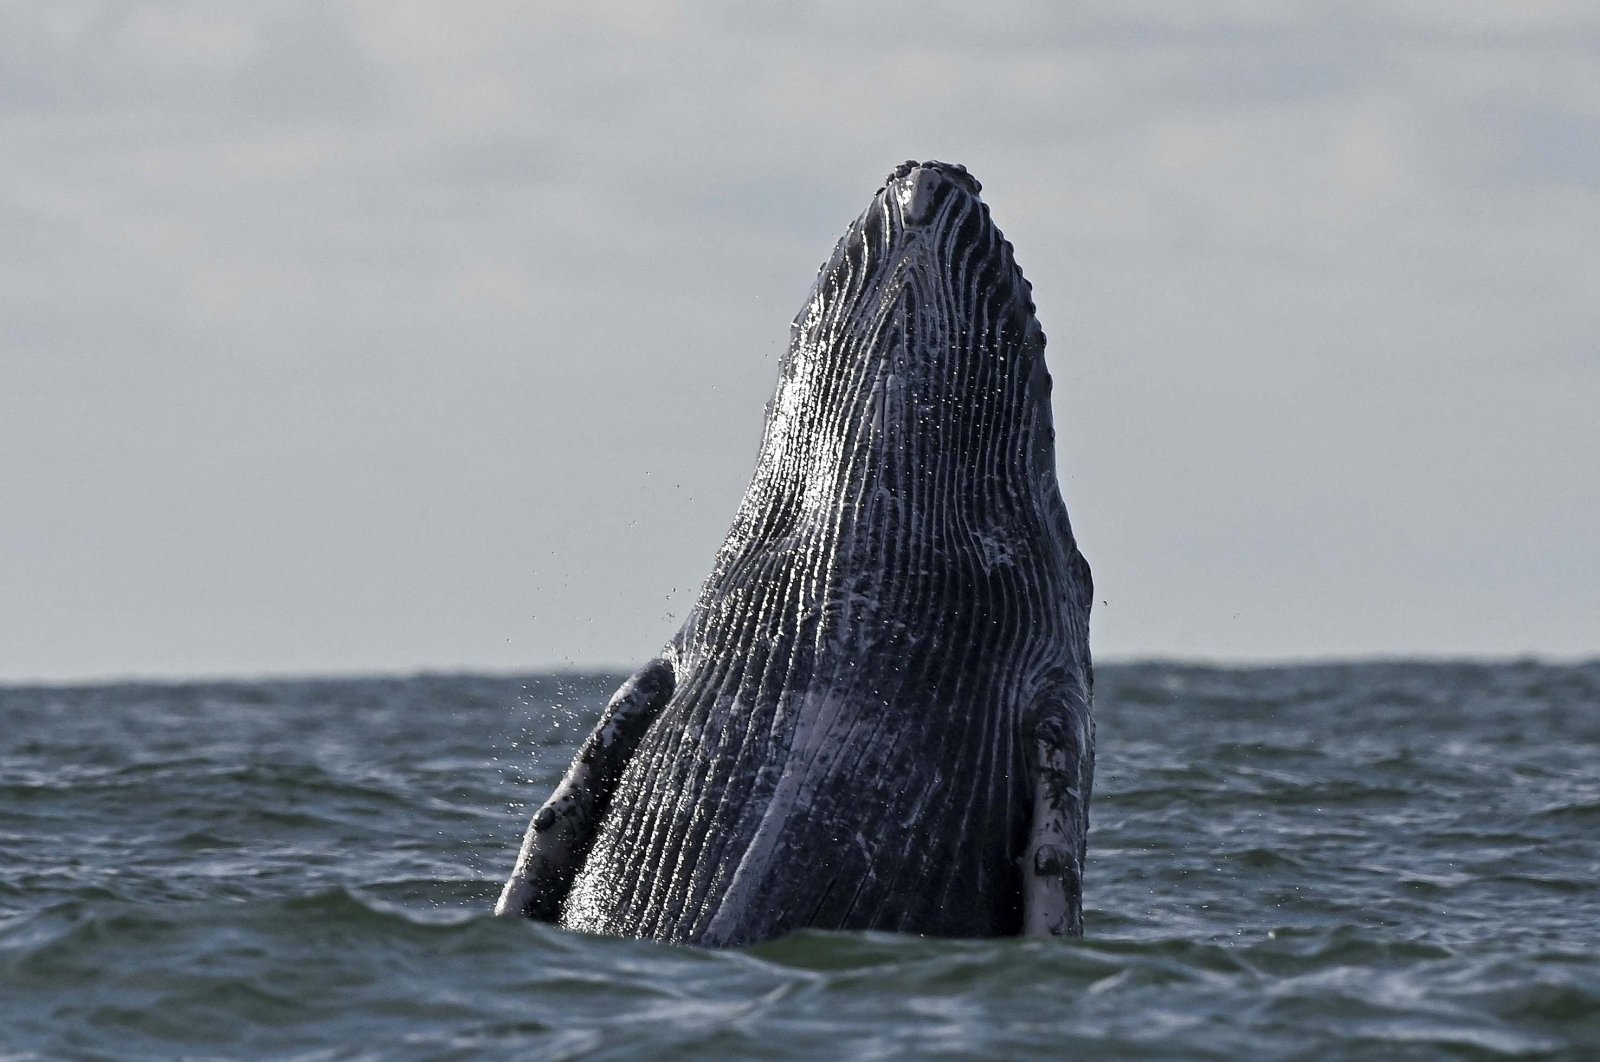 A humpback whale breaks the surface of the Pacific Ocean at the Uramba Bahia Malaga Natural Park near Buenaventura, Valle del Cauca, Colombia on Aug. 26, 2021. (AFP Photo)